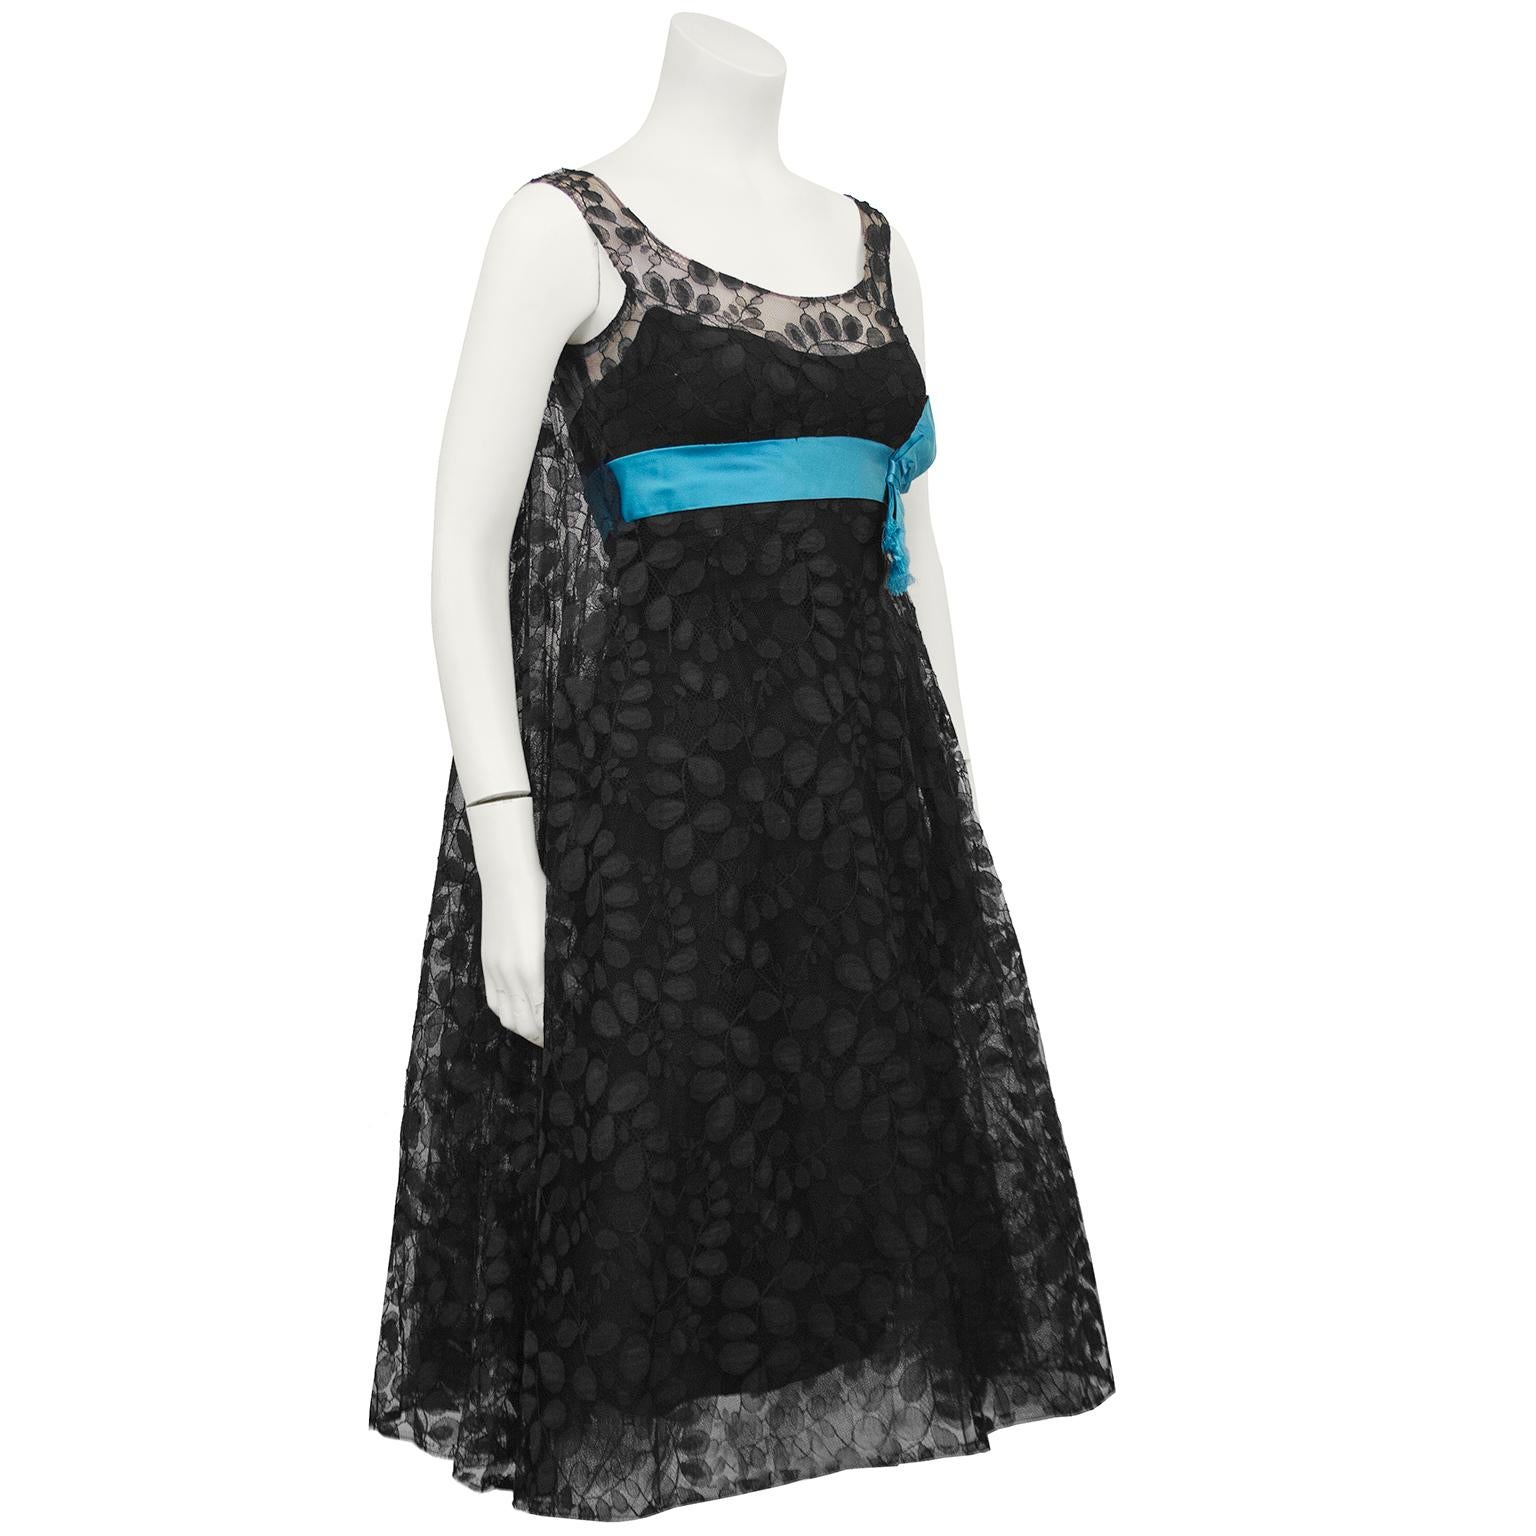 1950's black lace cocktail dress from the Saks Fifth Avenue label. The empire waistline is accentuated with an attached turquoise corded silk sash finished with an affixed bow. The dramatic back of the dress glides away in trapeze style and the